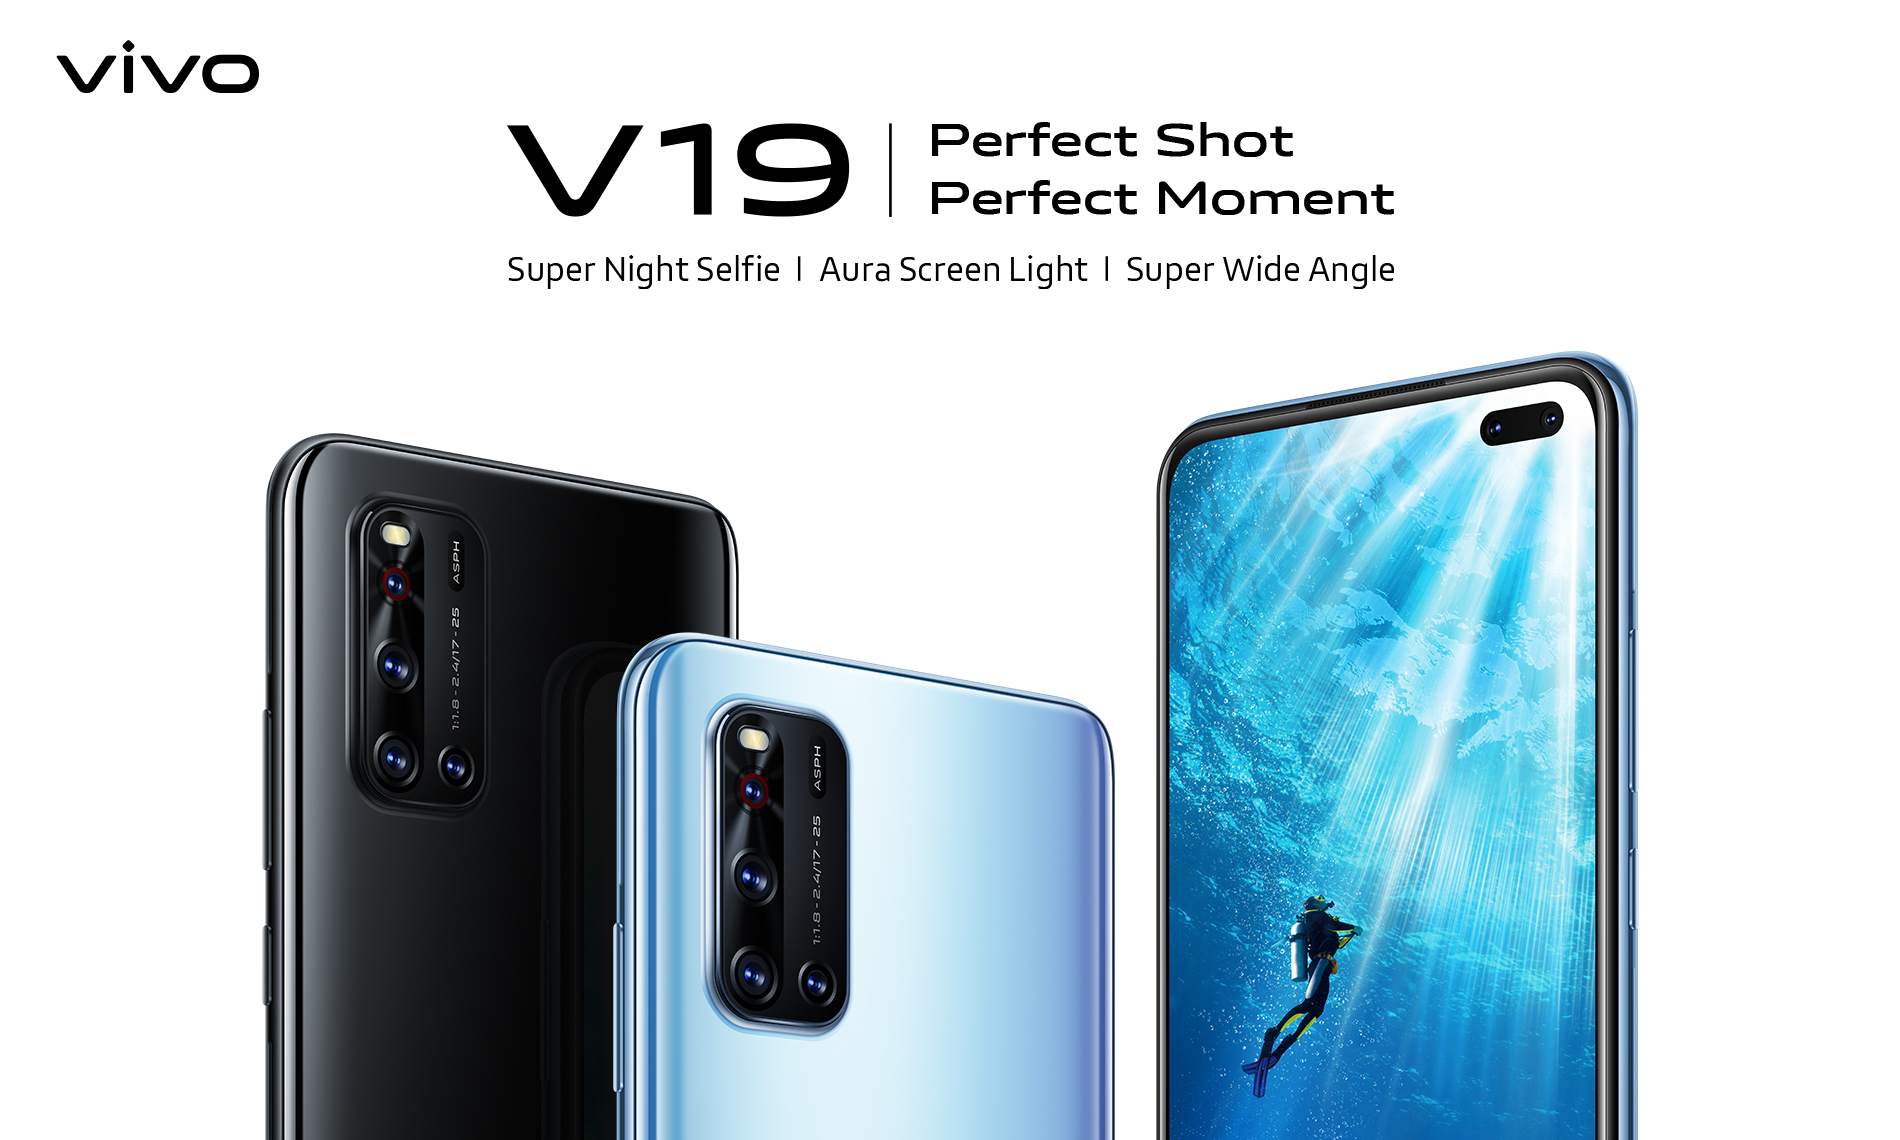 Capture Perfect Memories with the All-New vivo V19